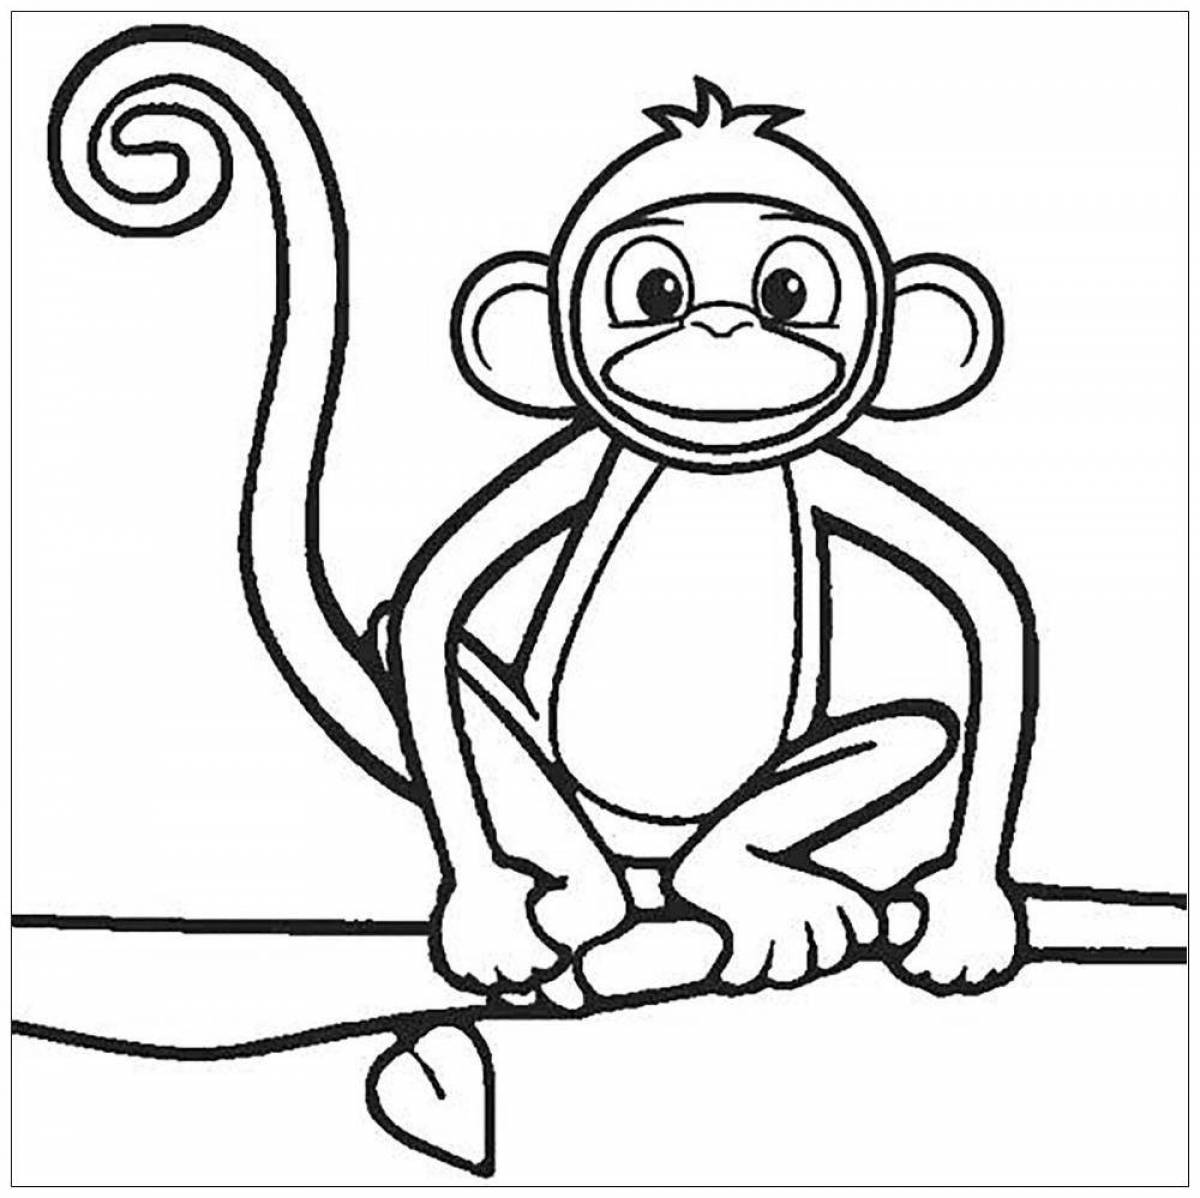 A fun monkey coloring book for kids